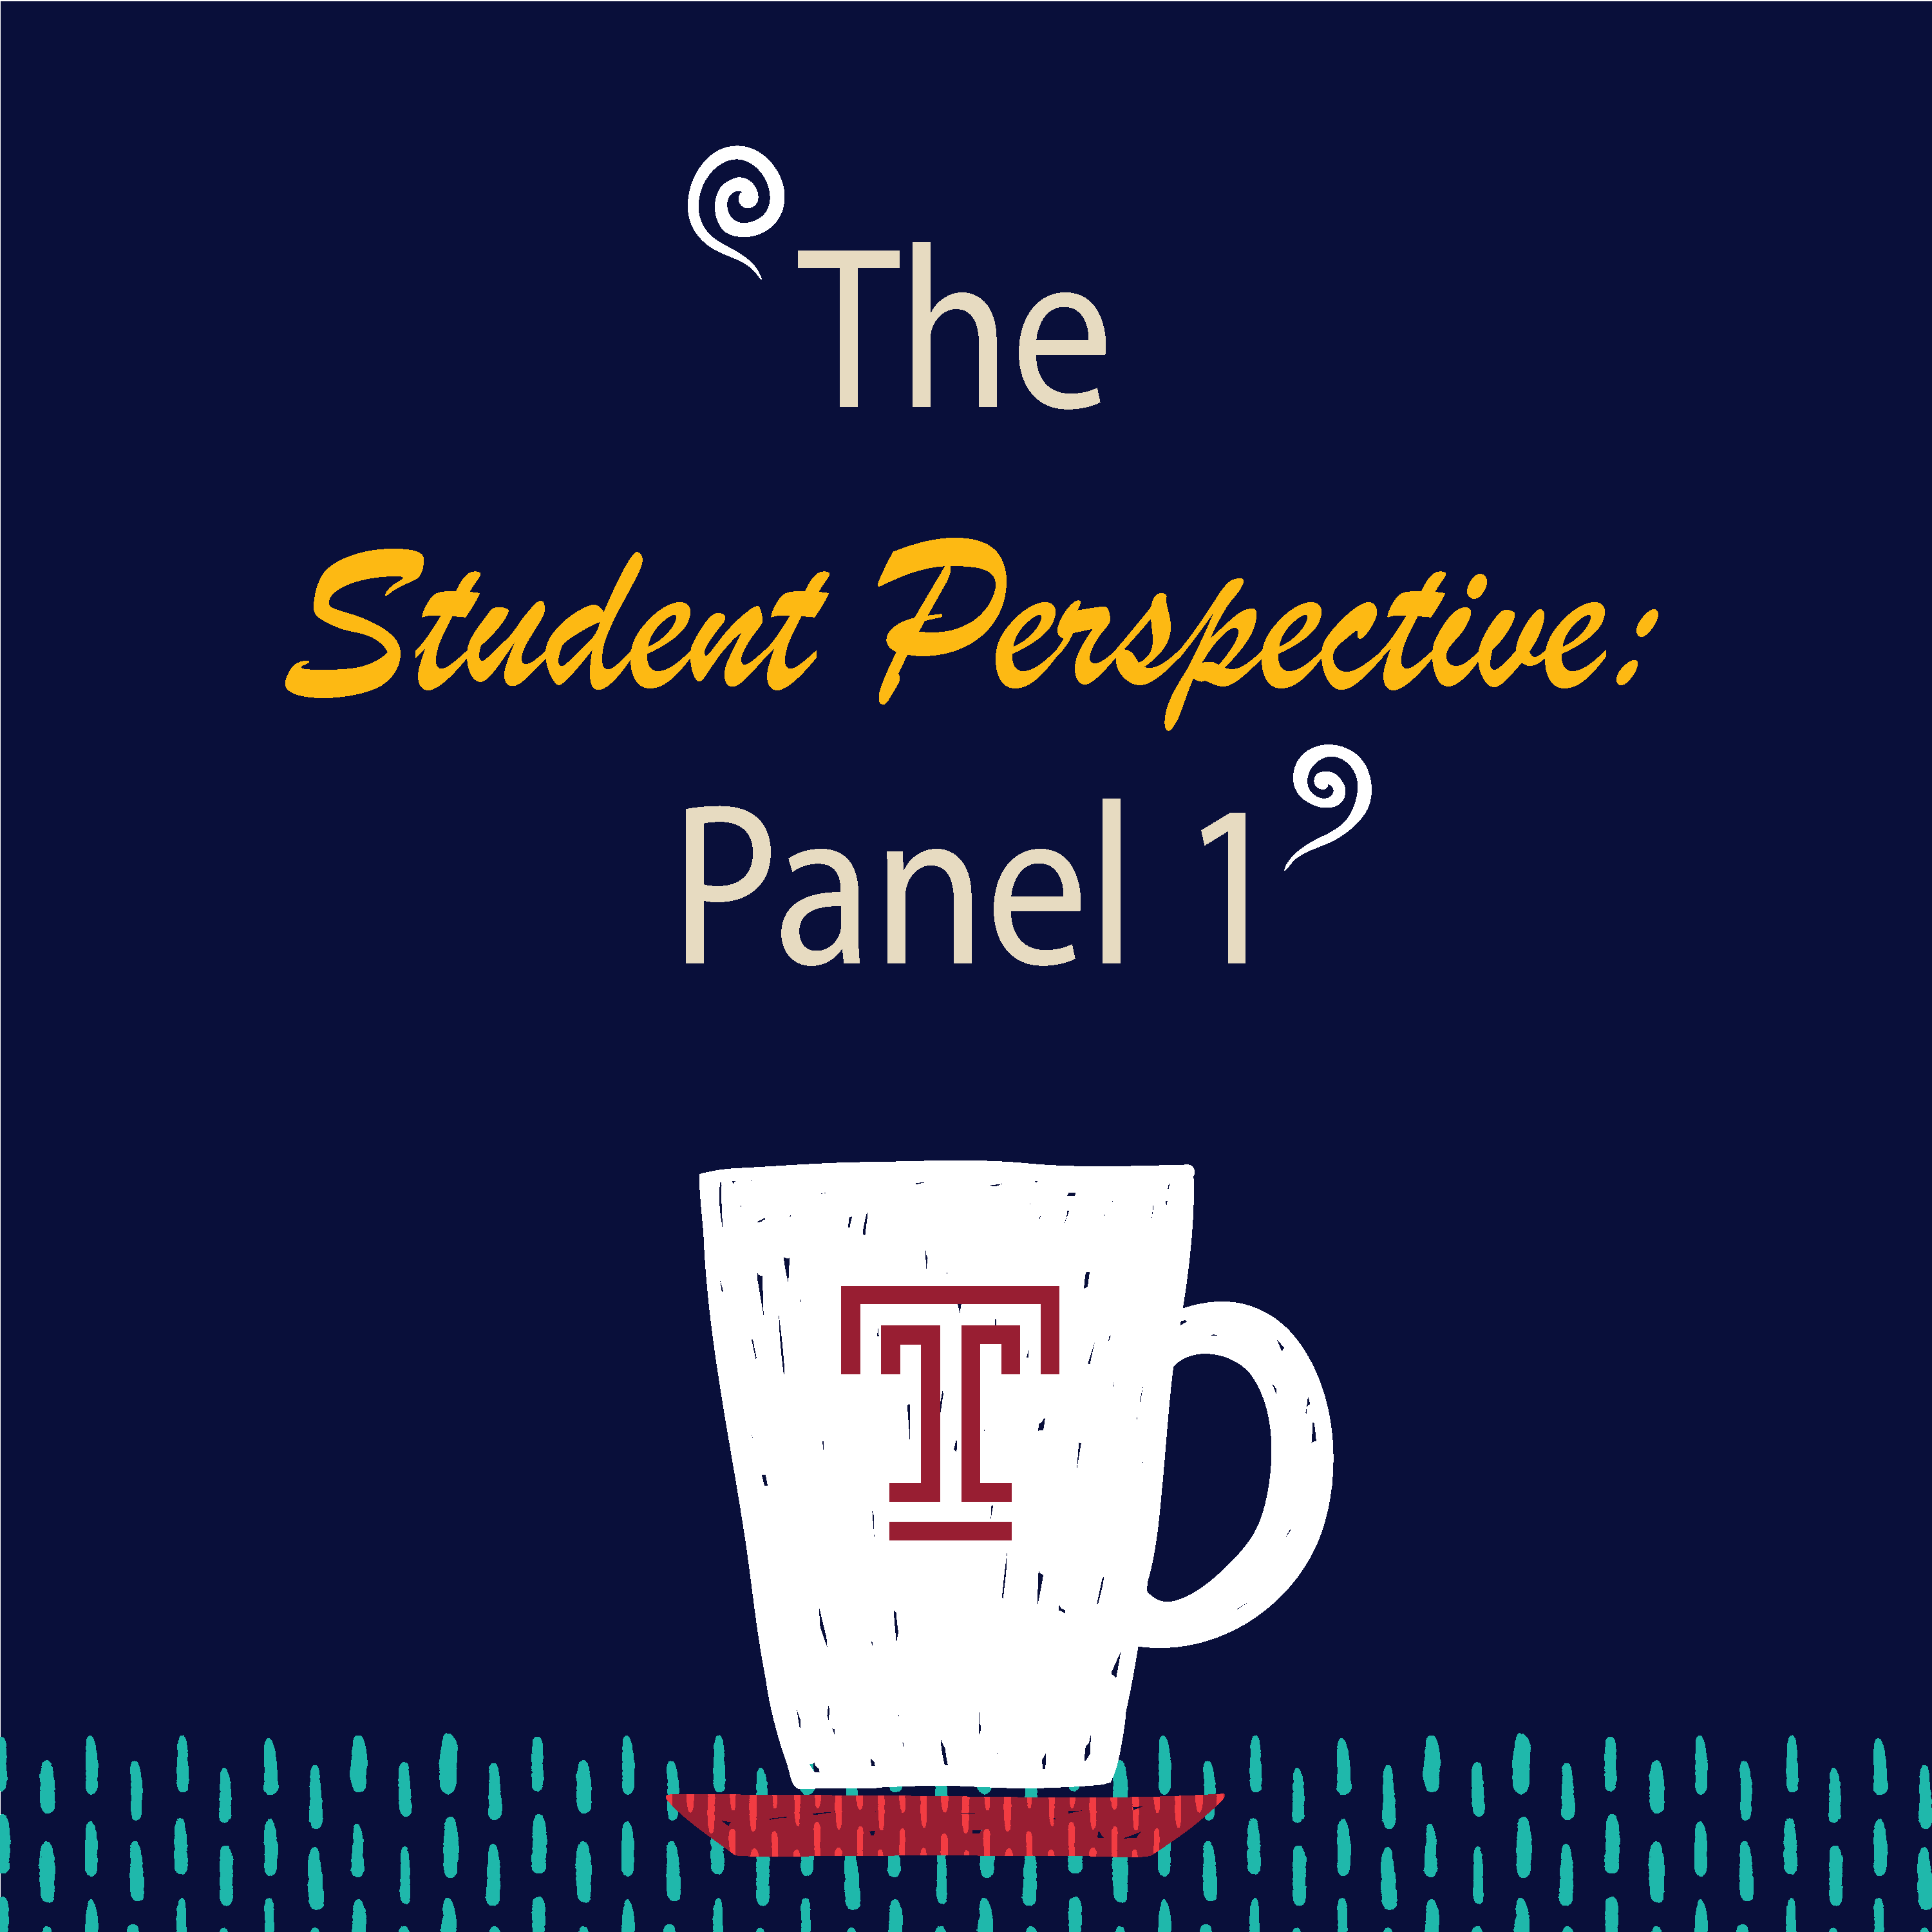 The Student Perspective: Panel 1